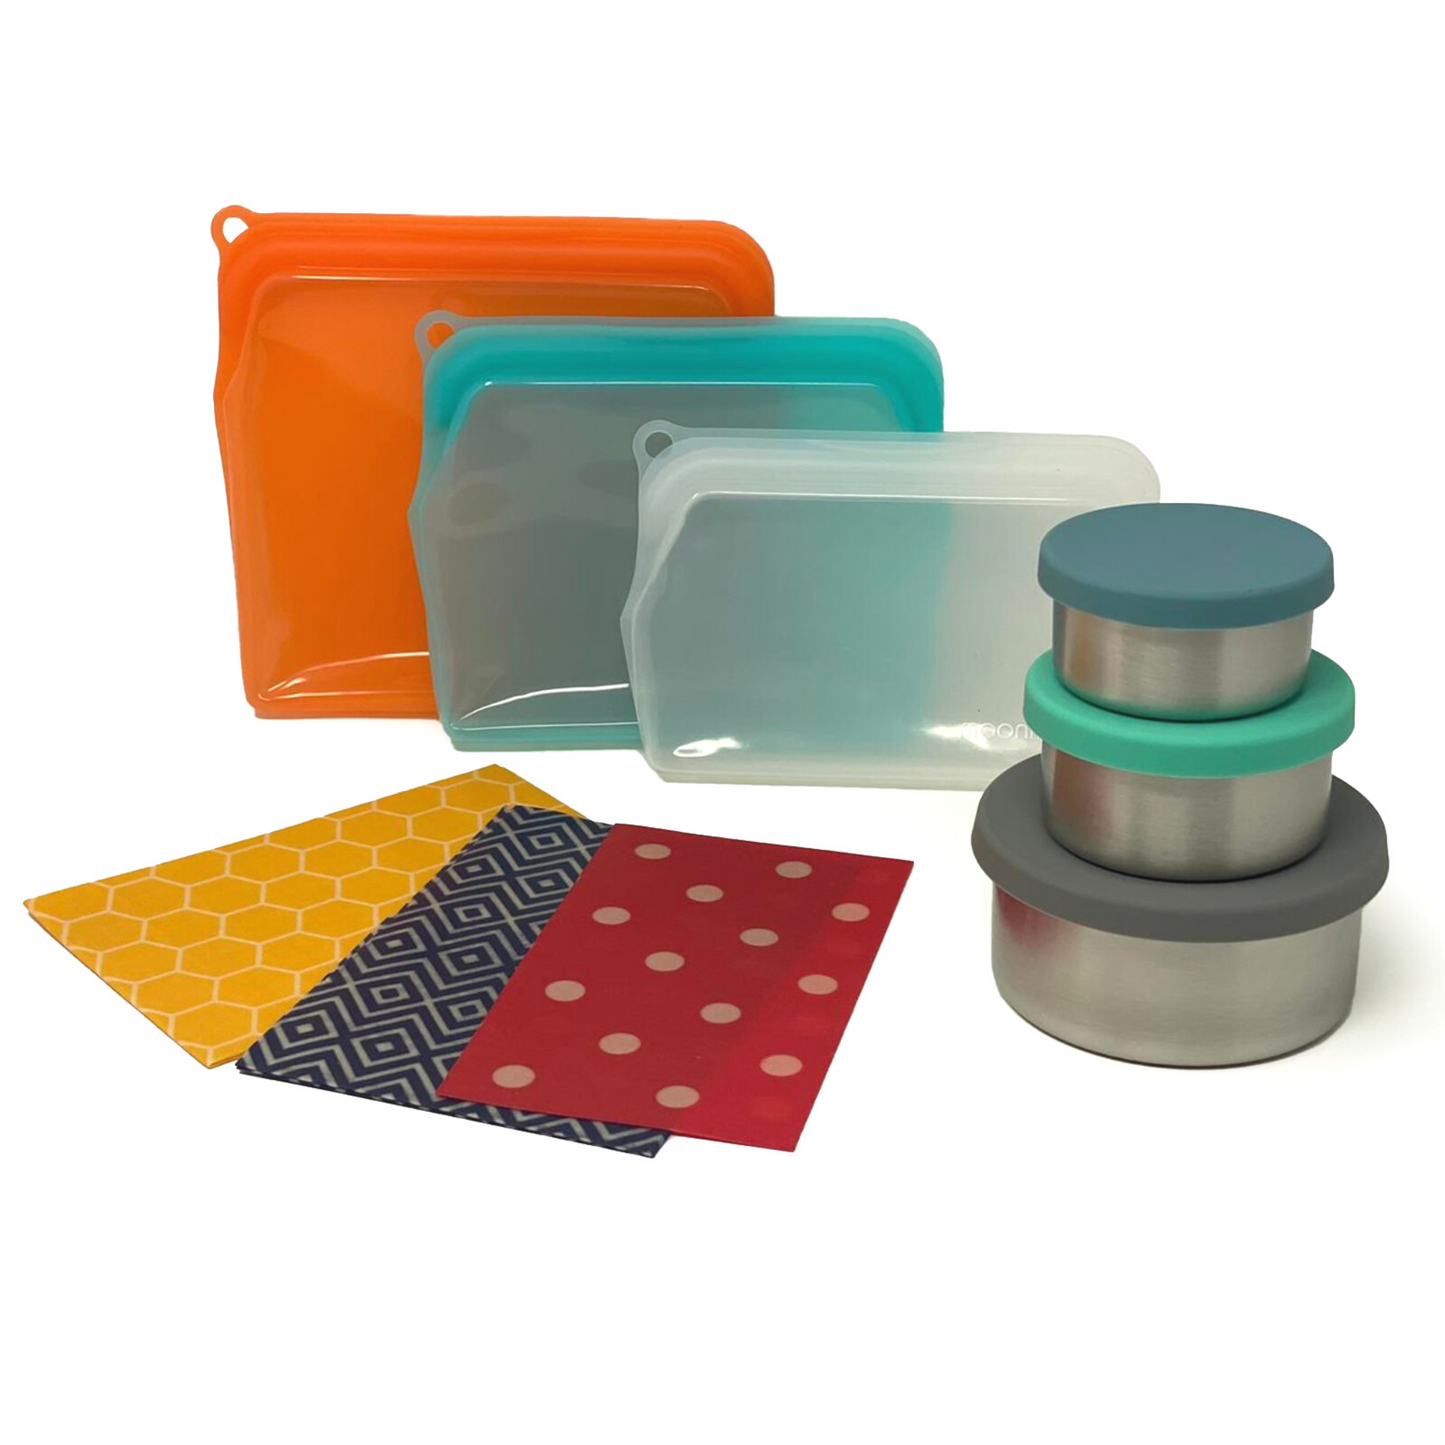 Moonmoon Reusable Products Eco Friendly Zero Waste Stainless Steel Food Storage Containers, Organic Beeswax Wraps, Silicone Food Bags. Eco-friendly, plastic free, silicone freezer bags